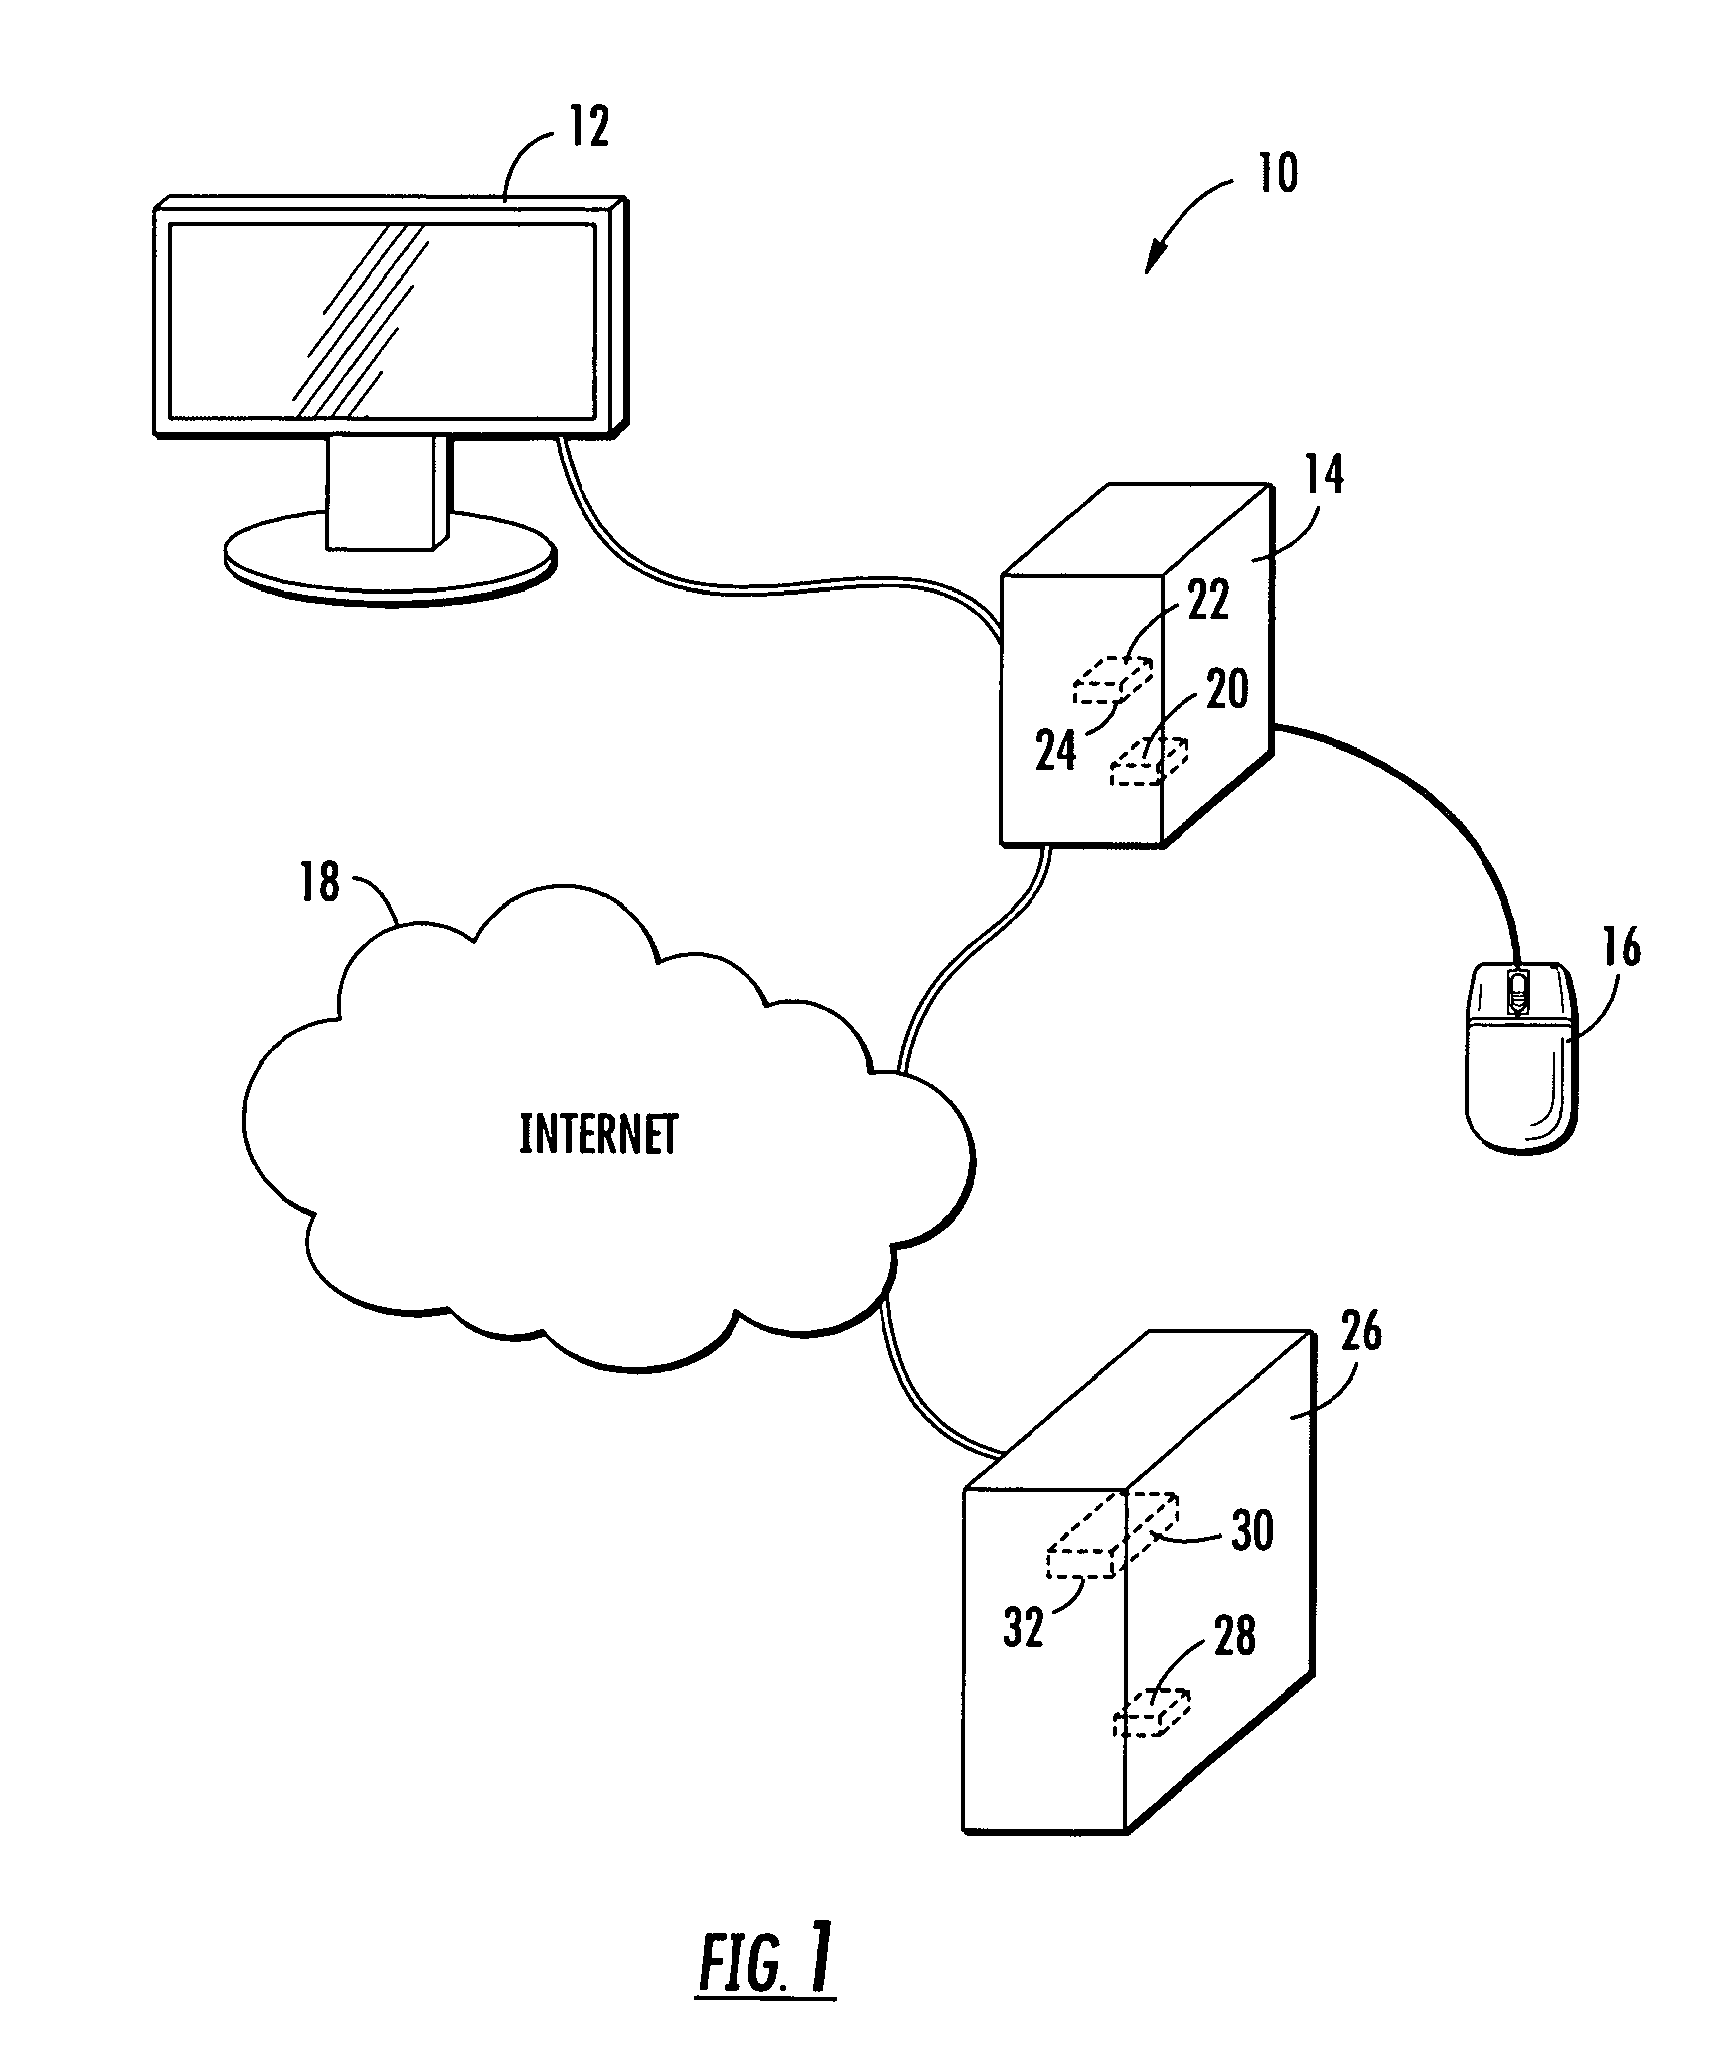 Method and System for Using Risk Tolerance and Life Goal Preferences and Rankings to Enhance